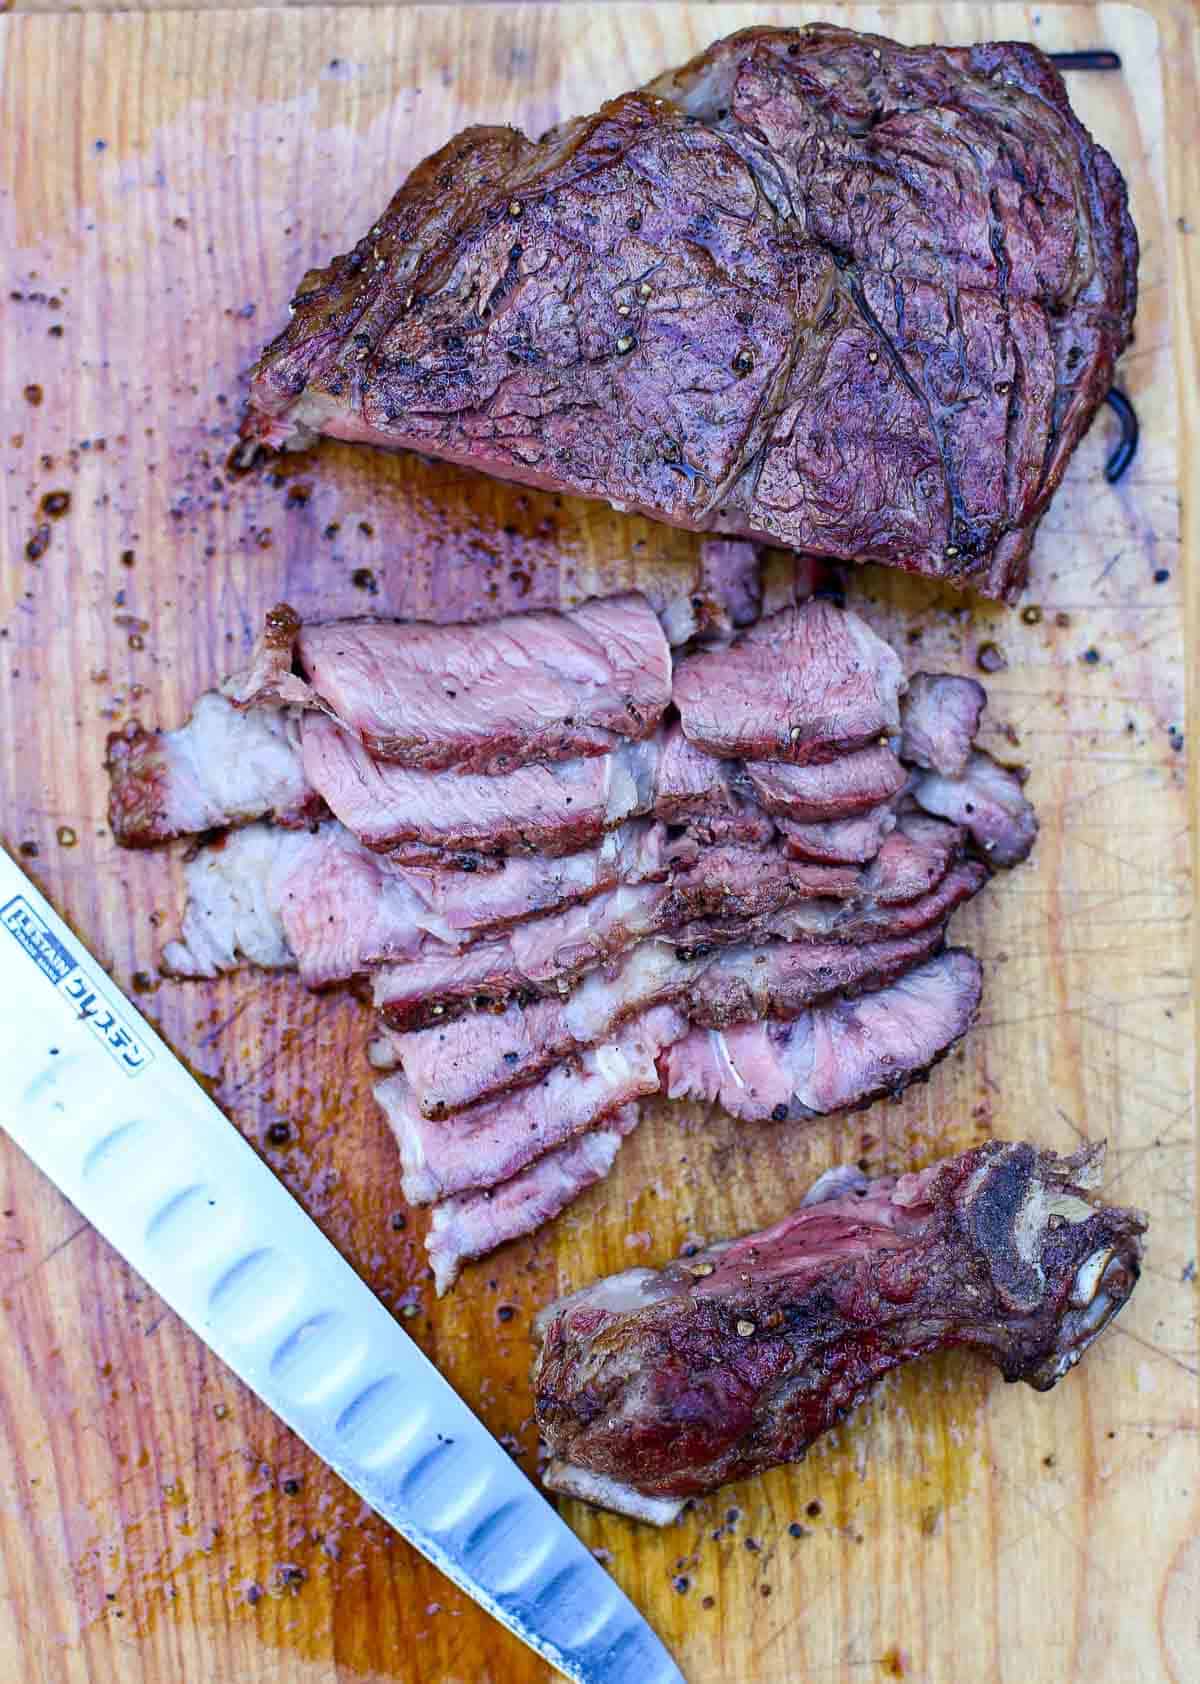 A Grilled Ribeye Steak sliced into thin slices